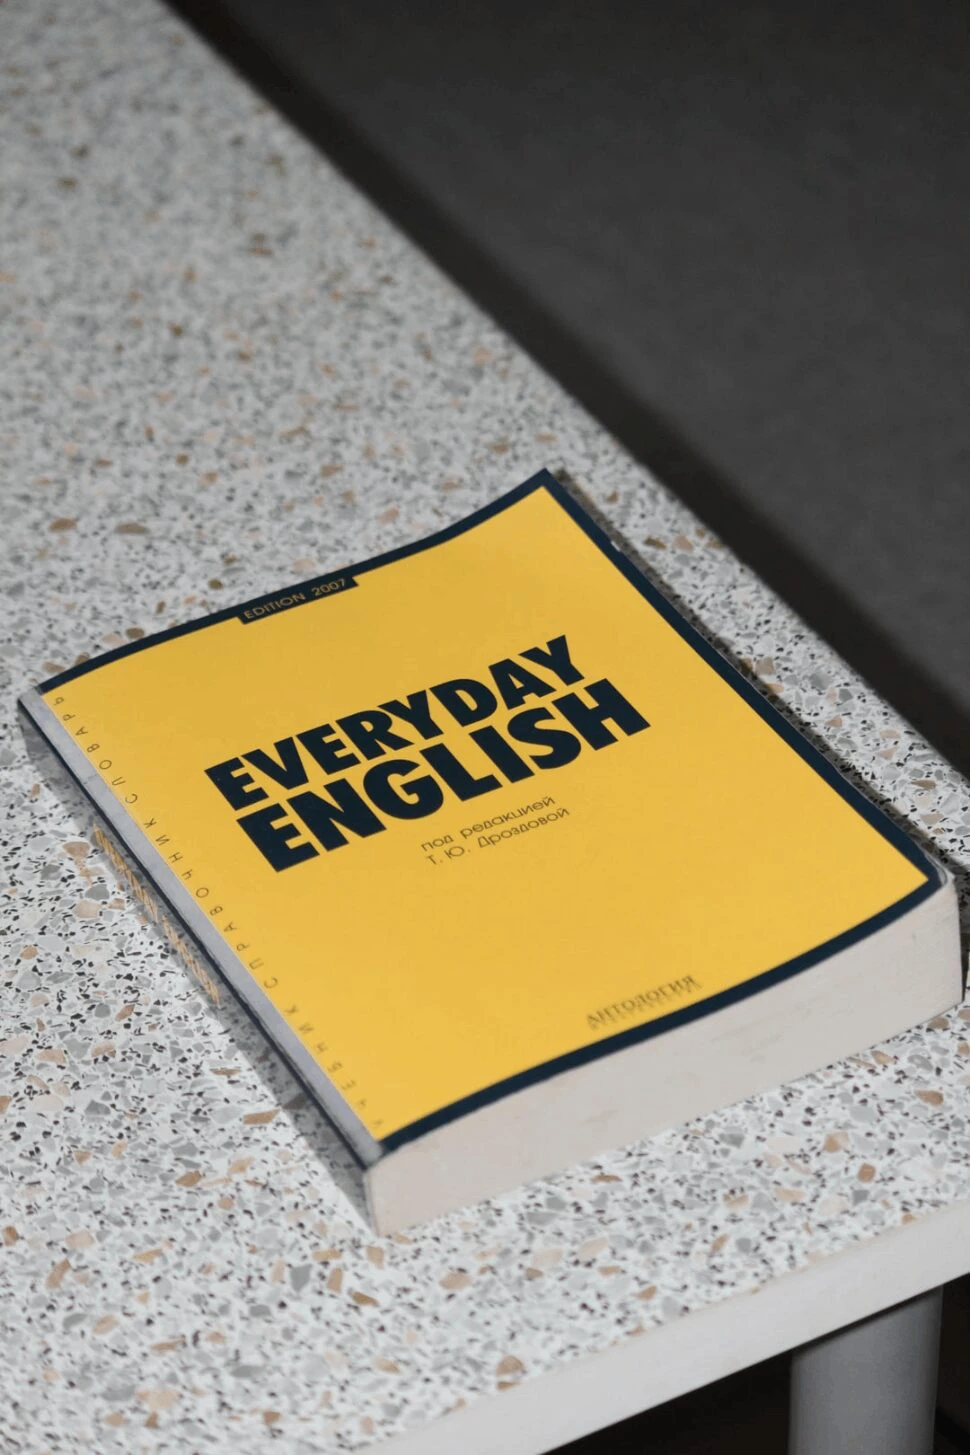 Everyday English book that's color yellow and lays on top of a concrete table.